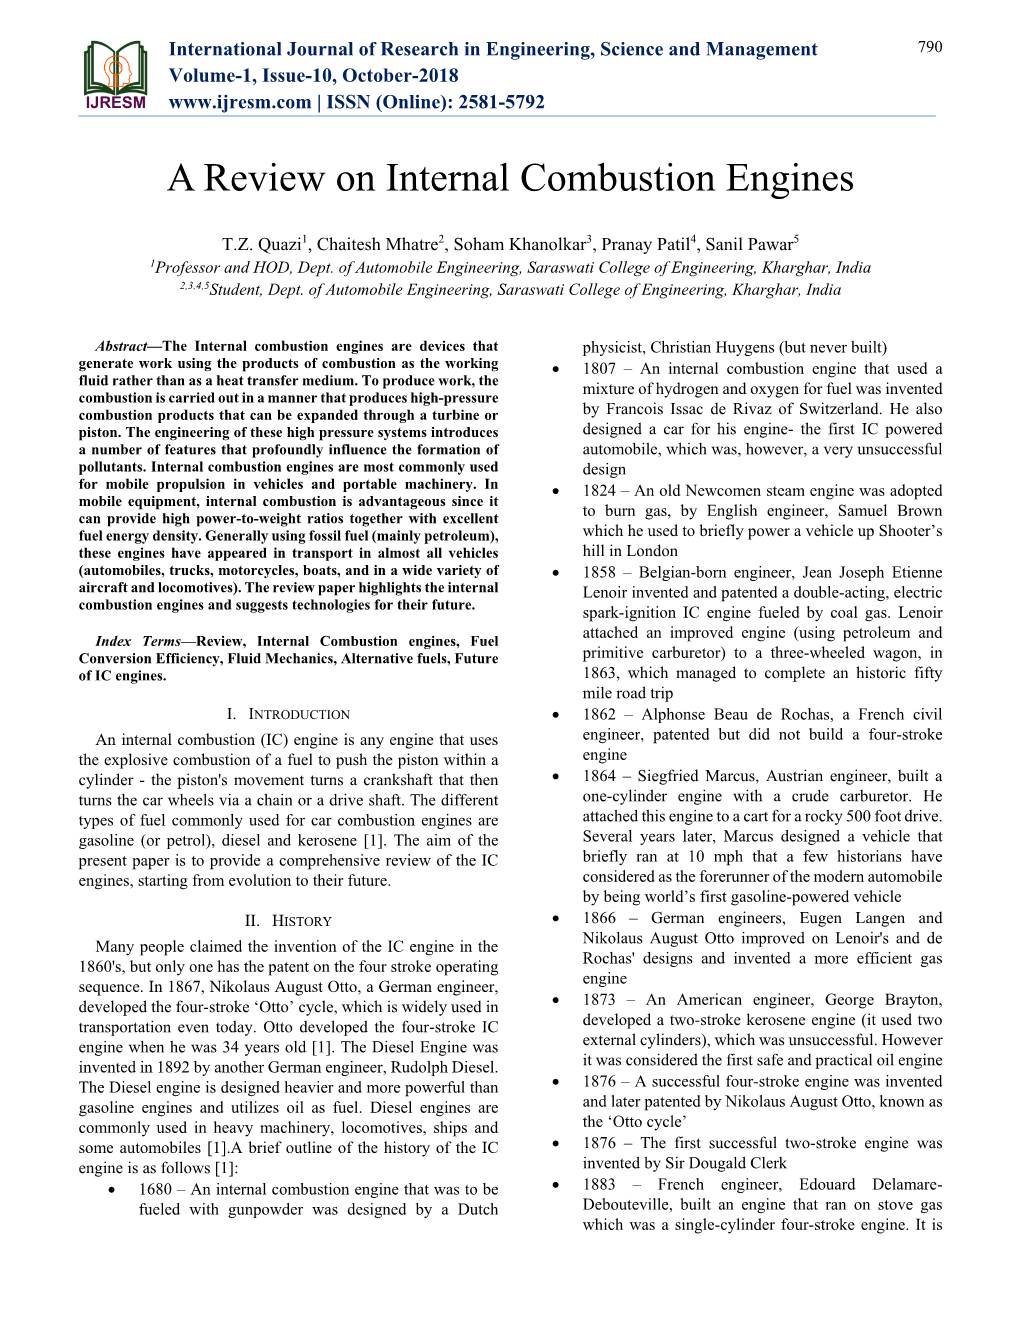 A Review on Internal Combustion Engines